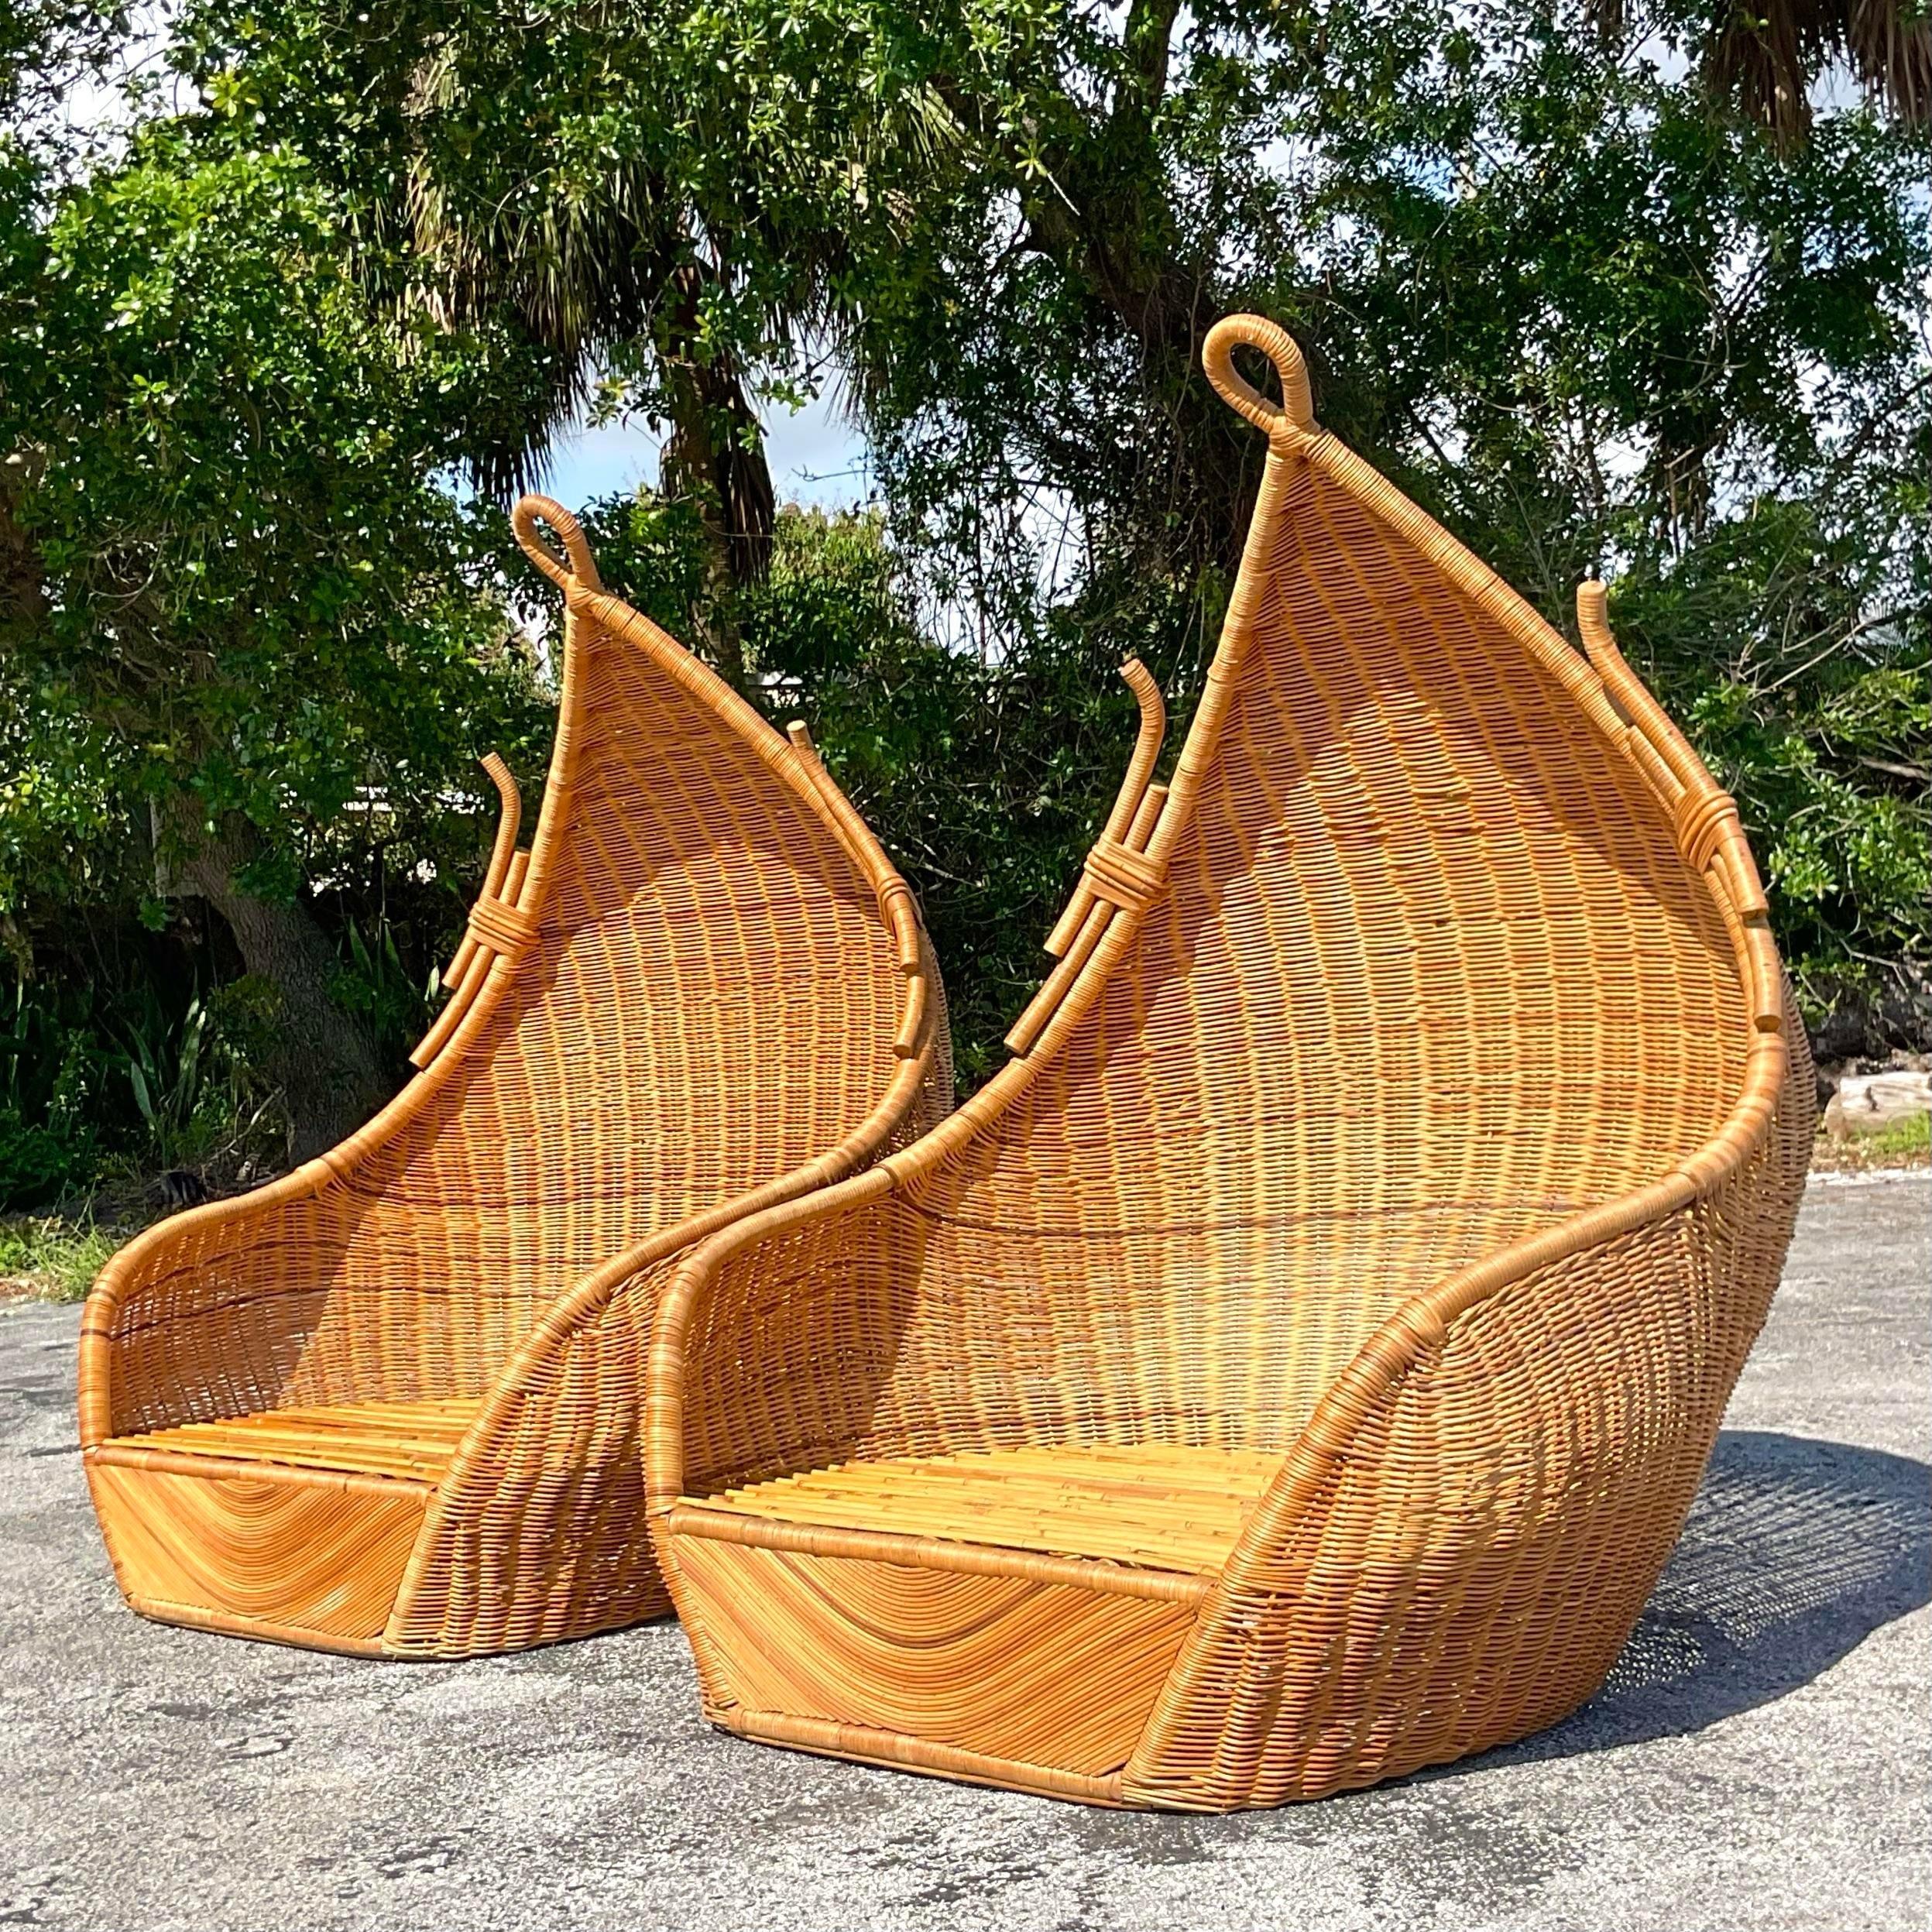 20th Century Vintage Coastal Woven Rattan Hooded Lounge Chairs - a Pair For Sale